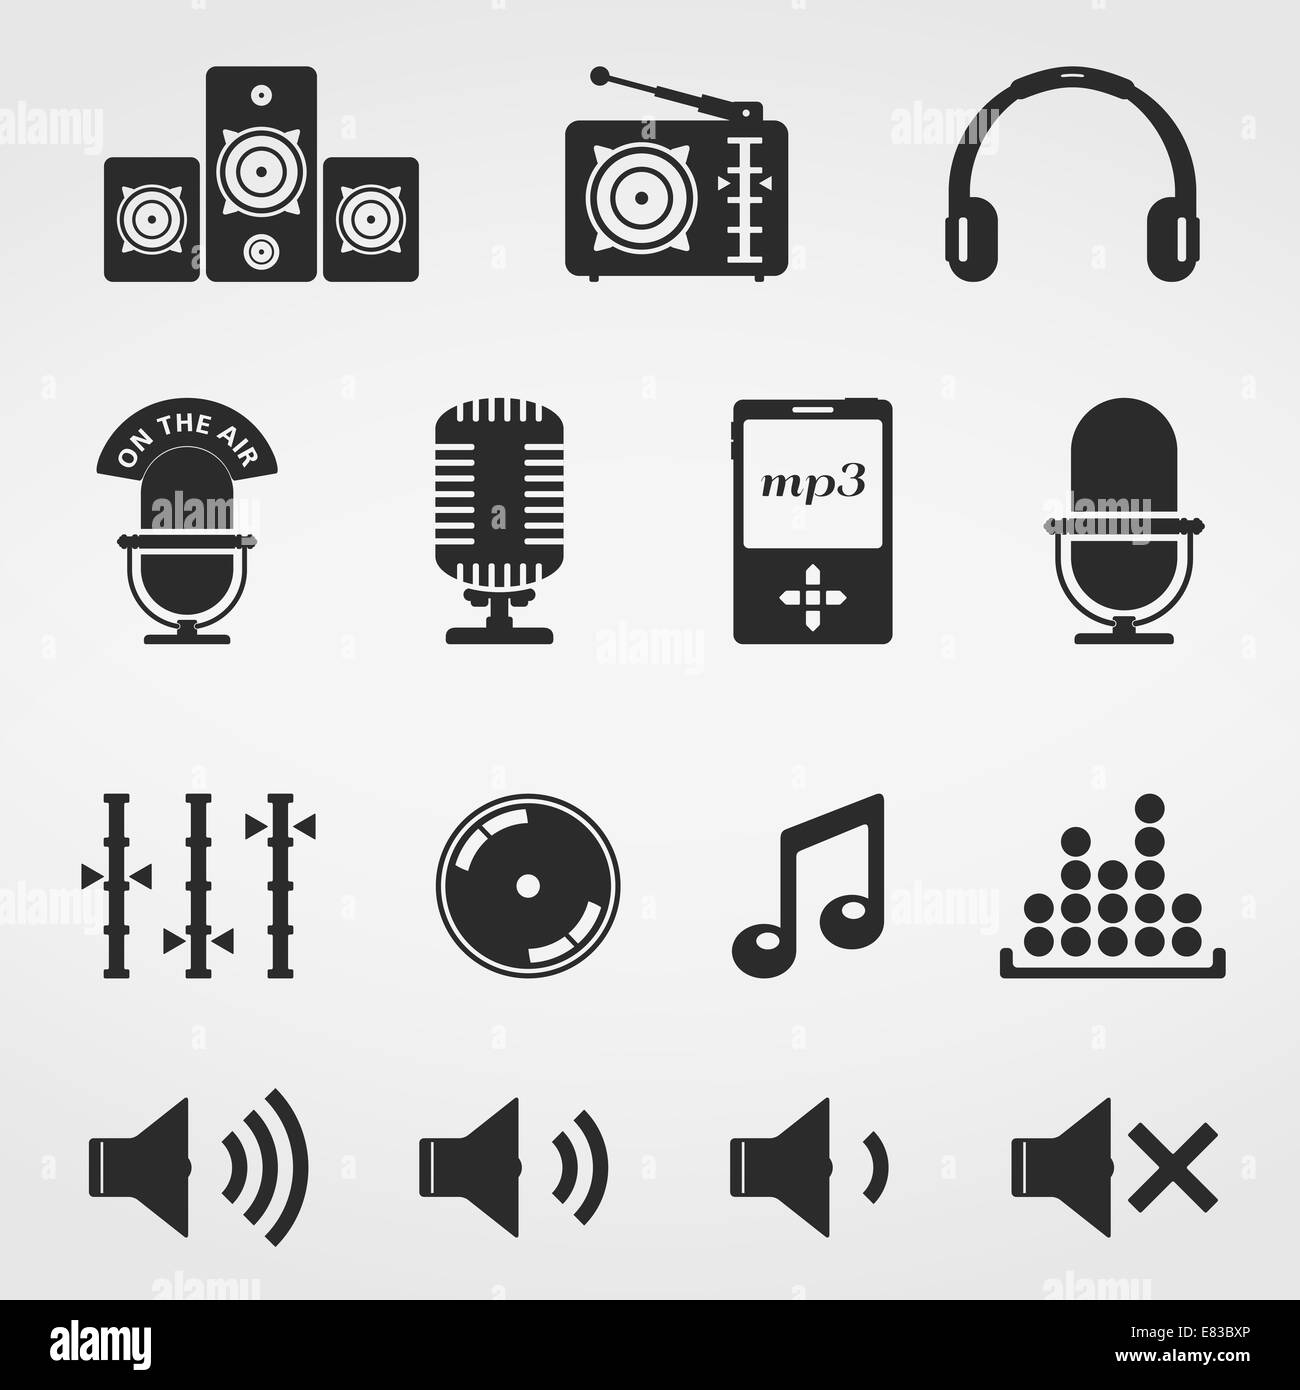 Sound and music icons set Stock Photo